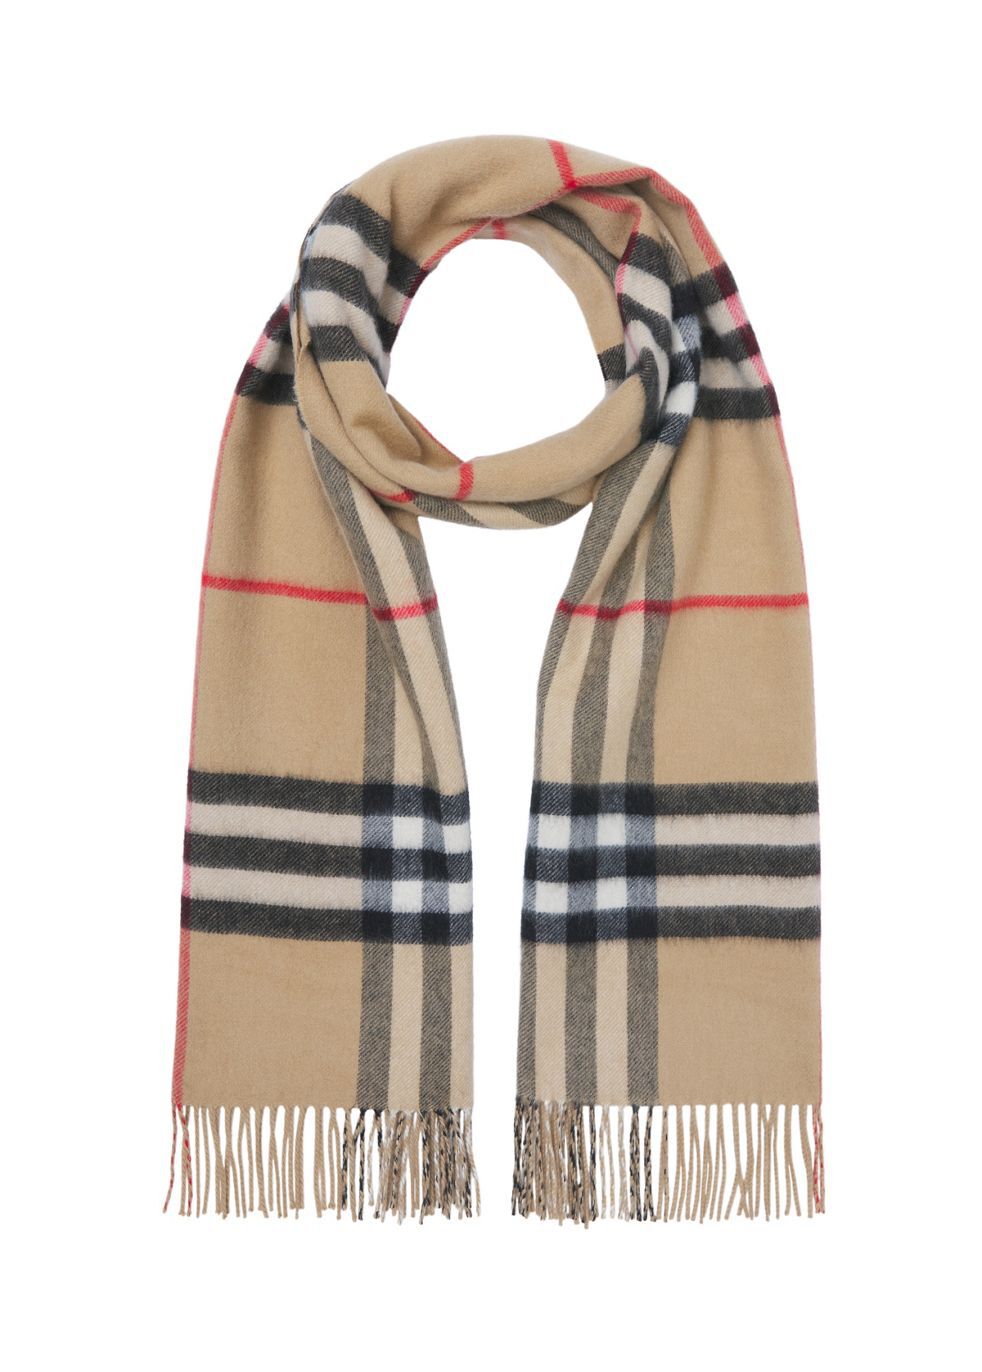 Burberry Reversible Check Cashmere Scarf Hats & Scarves | Heathrow Boutique